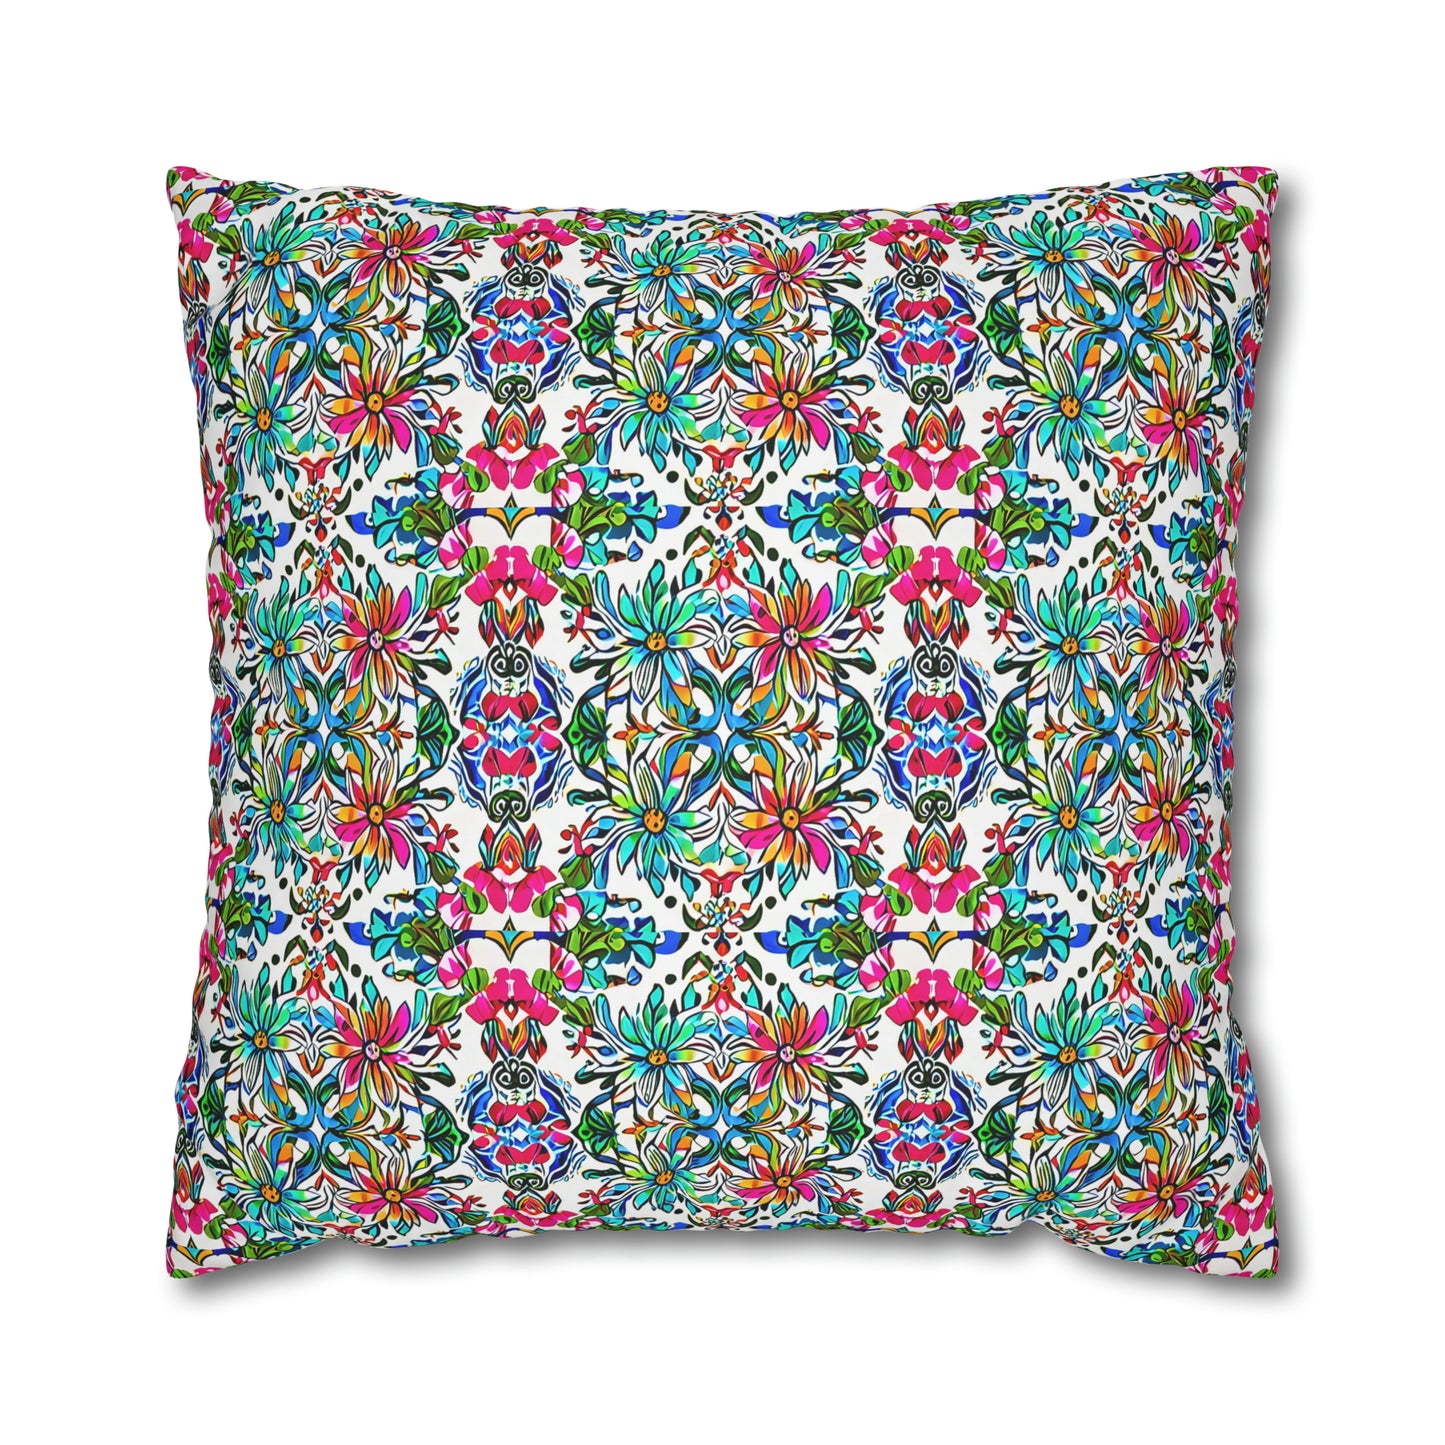 Chelsea Spring Flowers Decorative Spun Polyester Pillow Cover